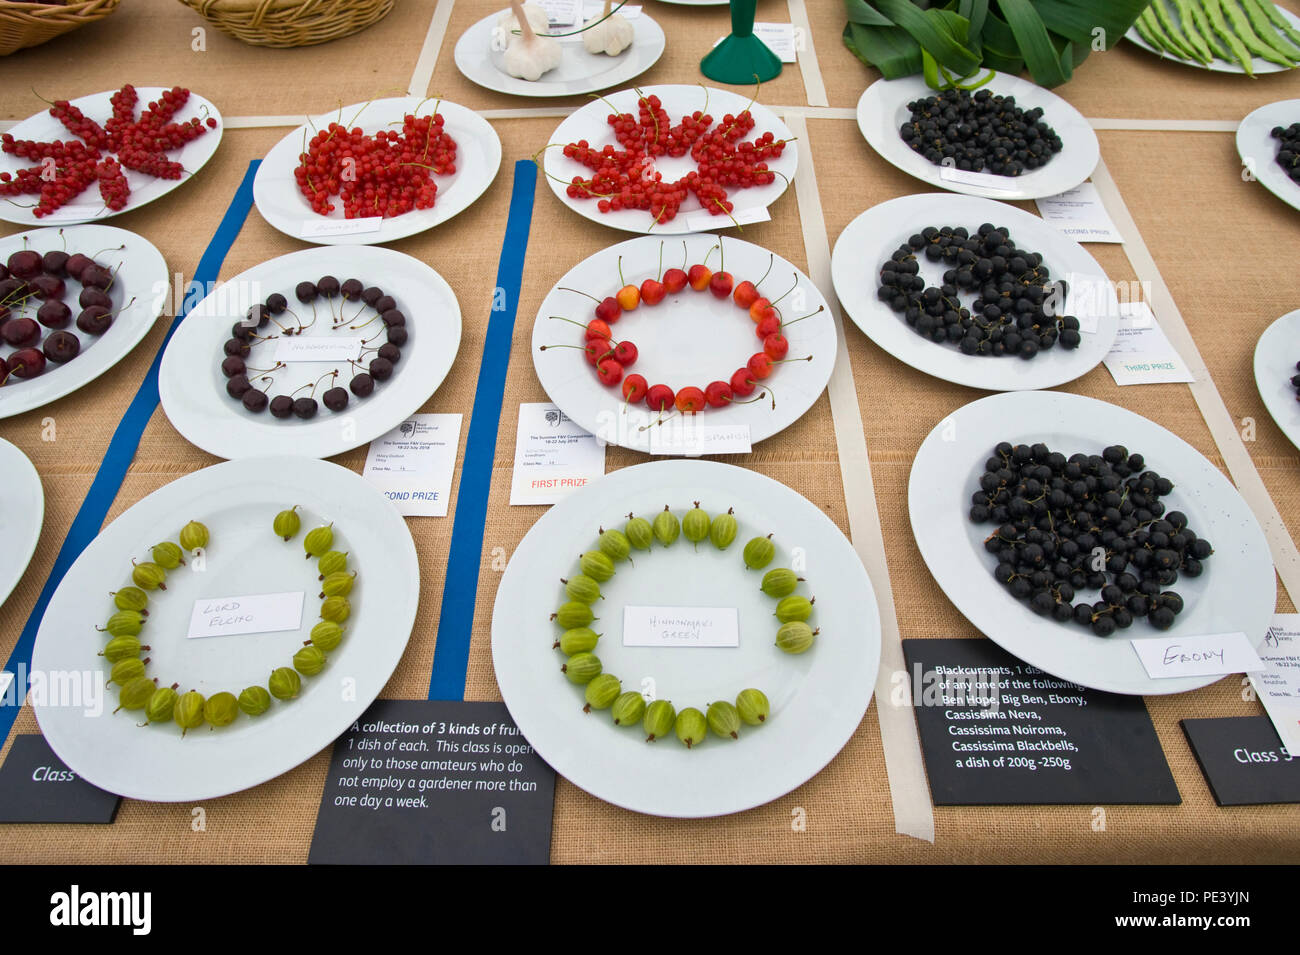 Prizewinning fruit on display at RHS Tatton Park flower show Cheshire England UK Stock Photo